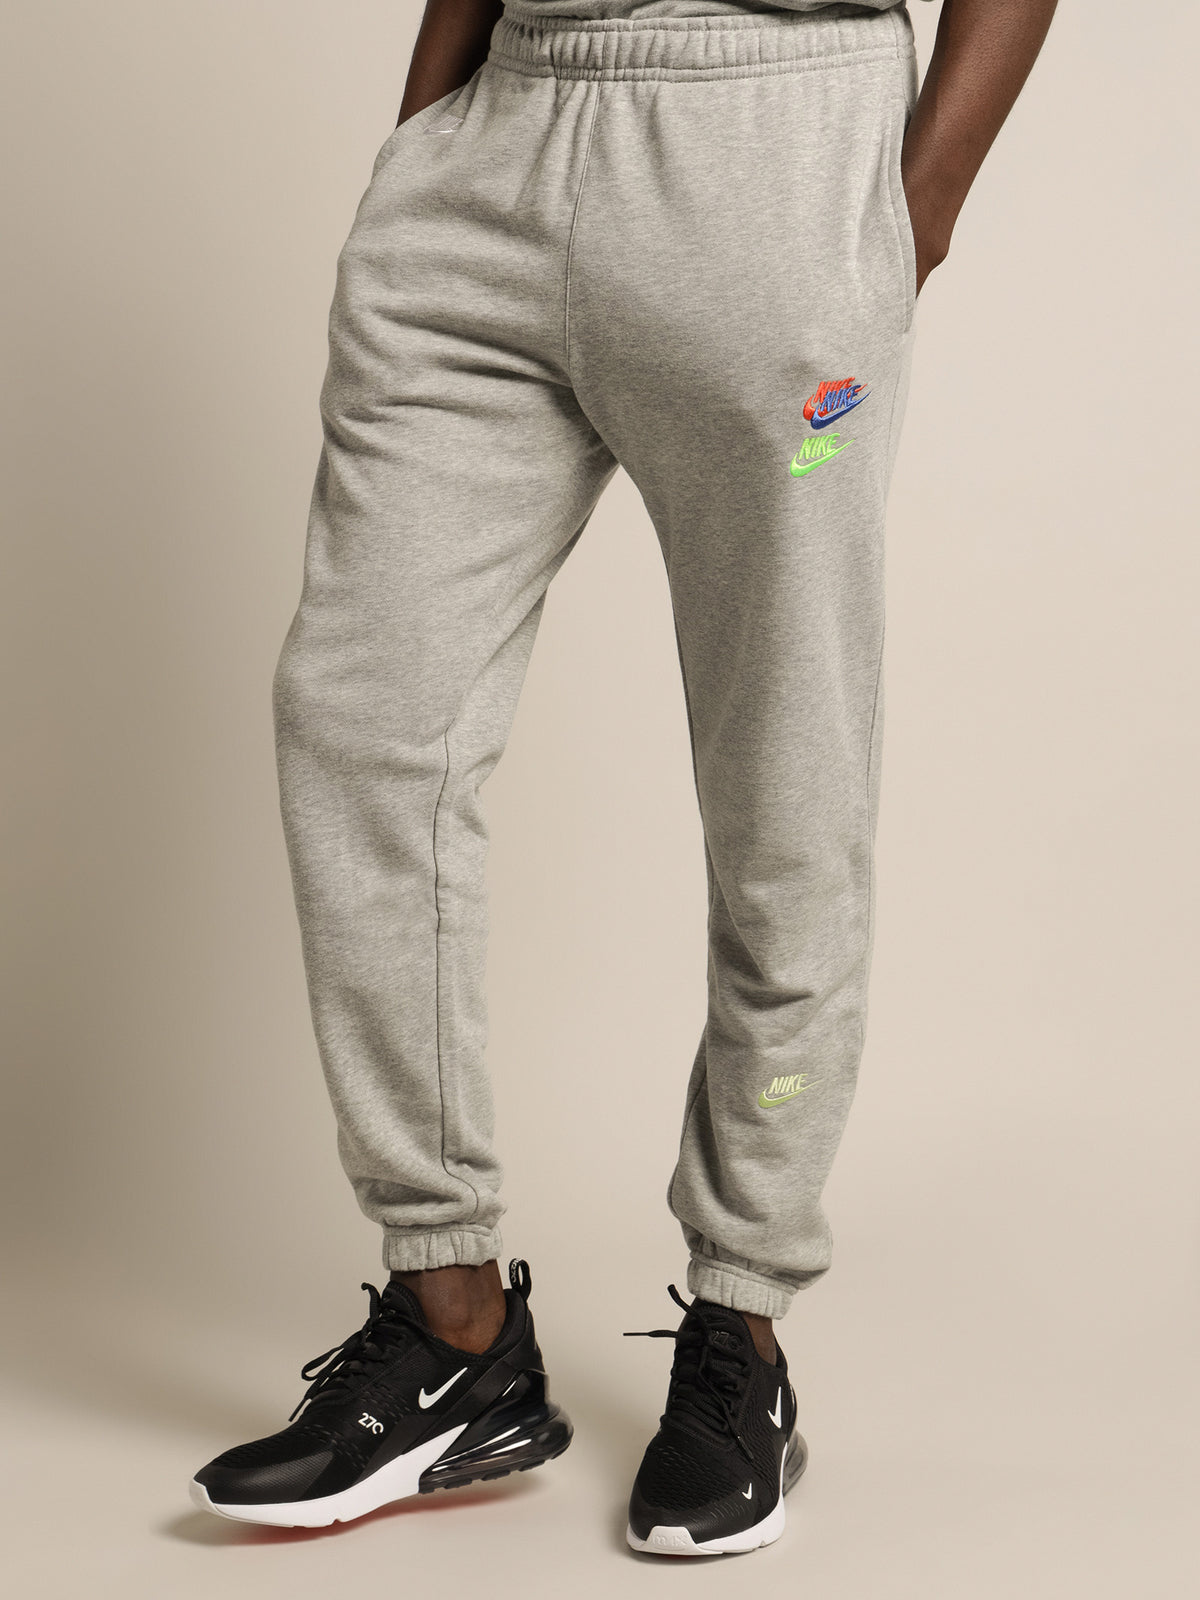 NSW French Terry Track Pants in Dark Grey Heather